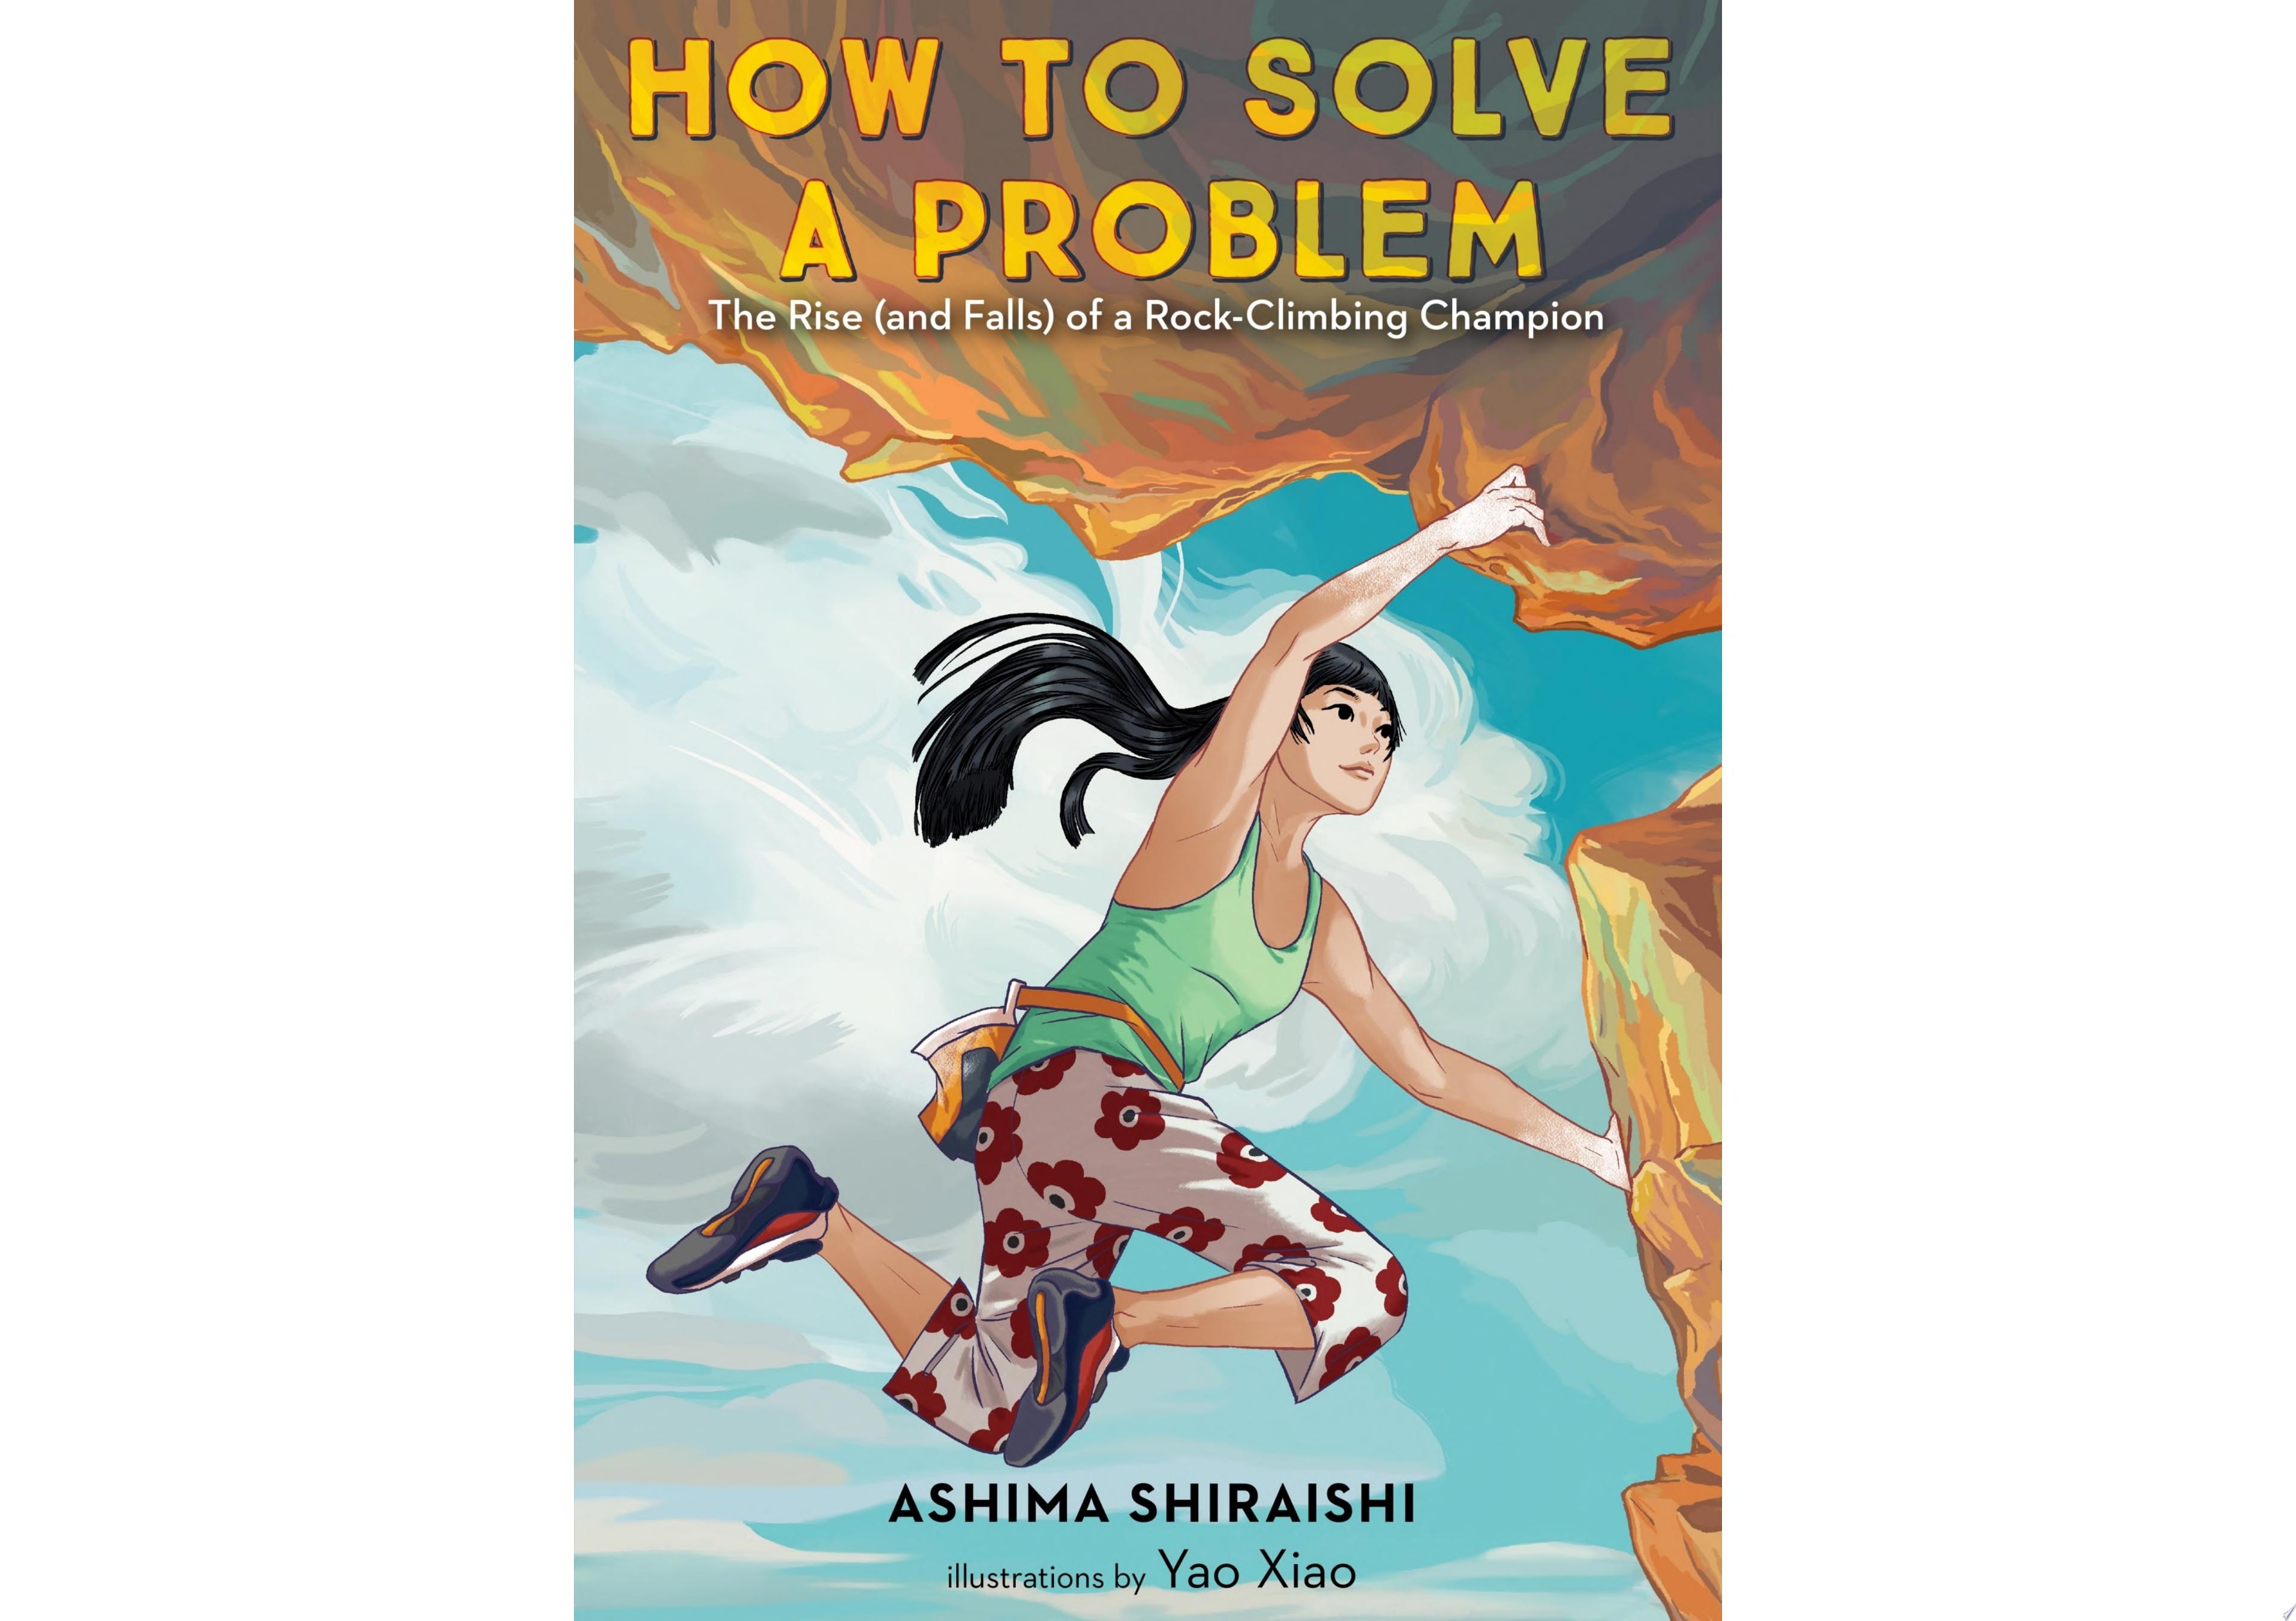 Image for "How to Solve a Problem"